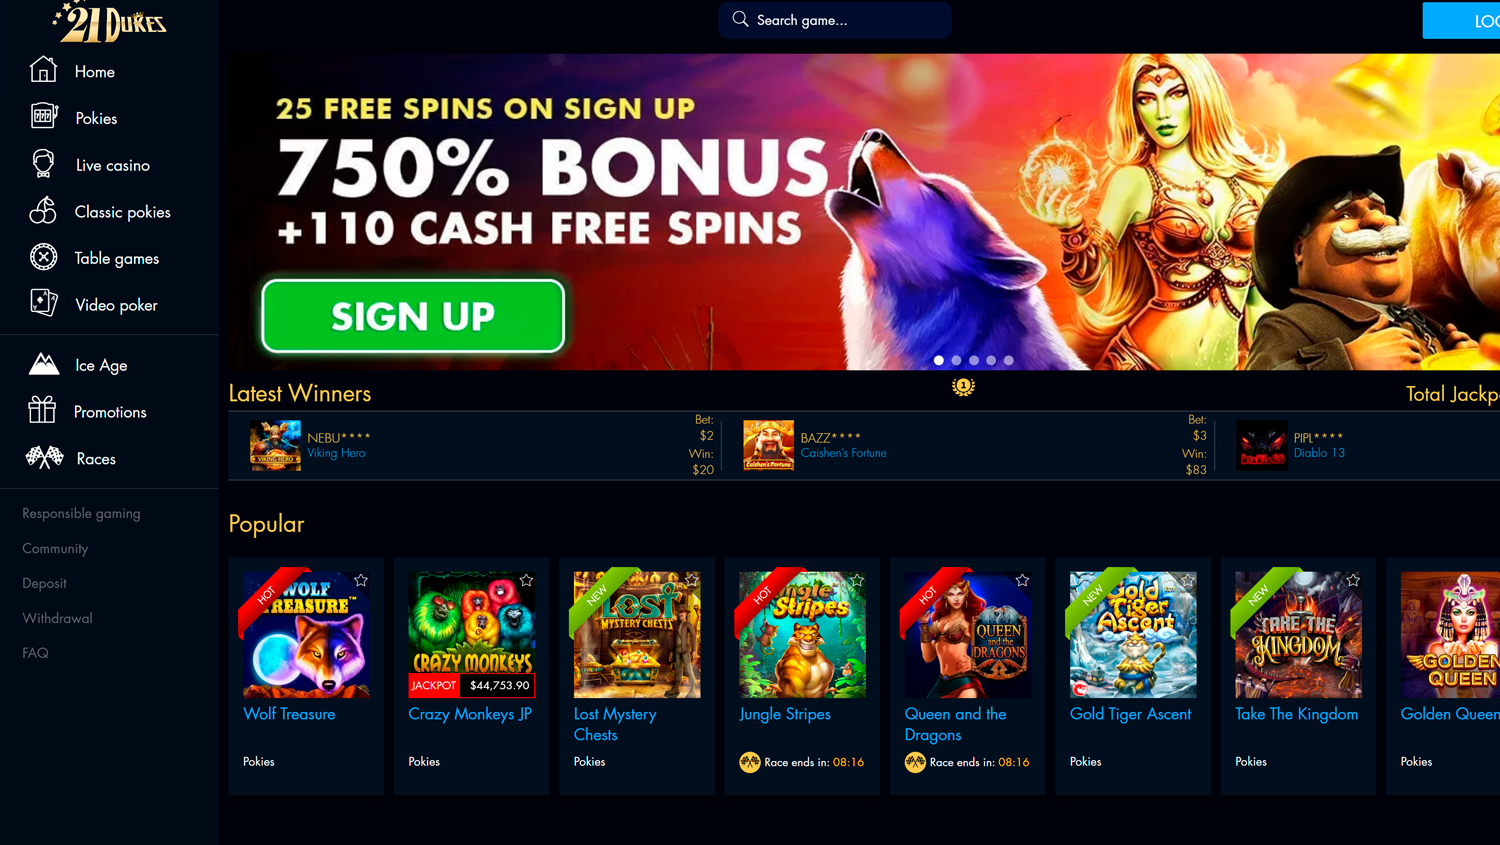 21Dukes casino main page of the site